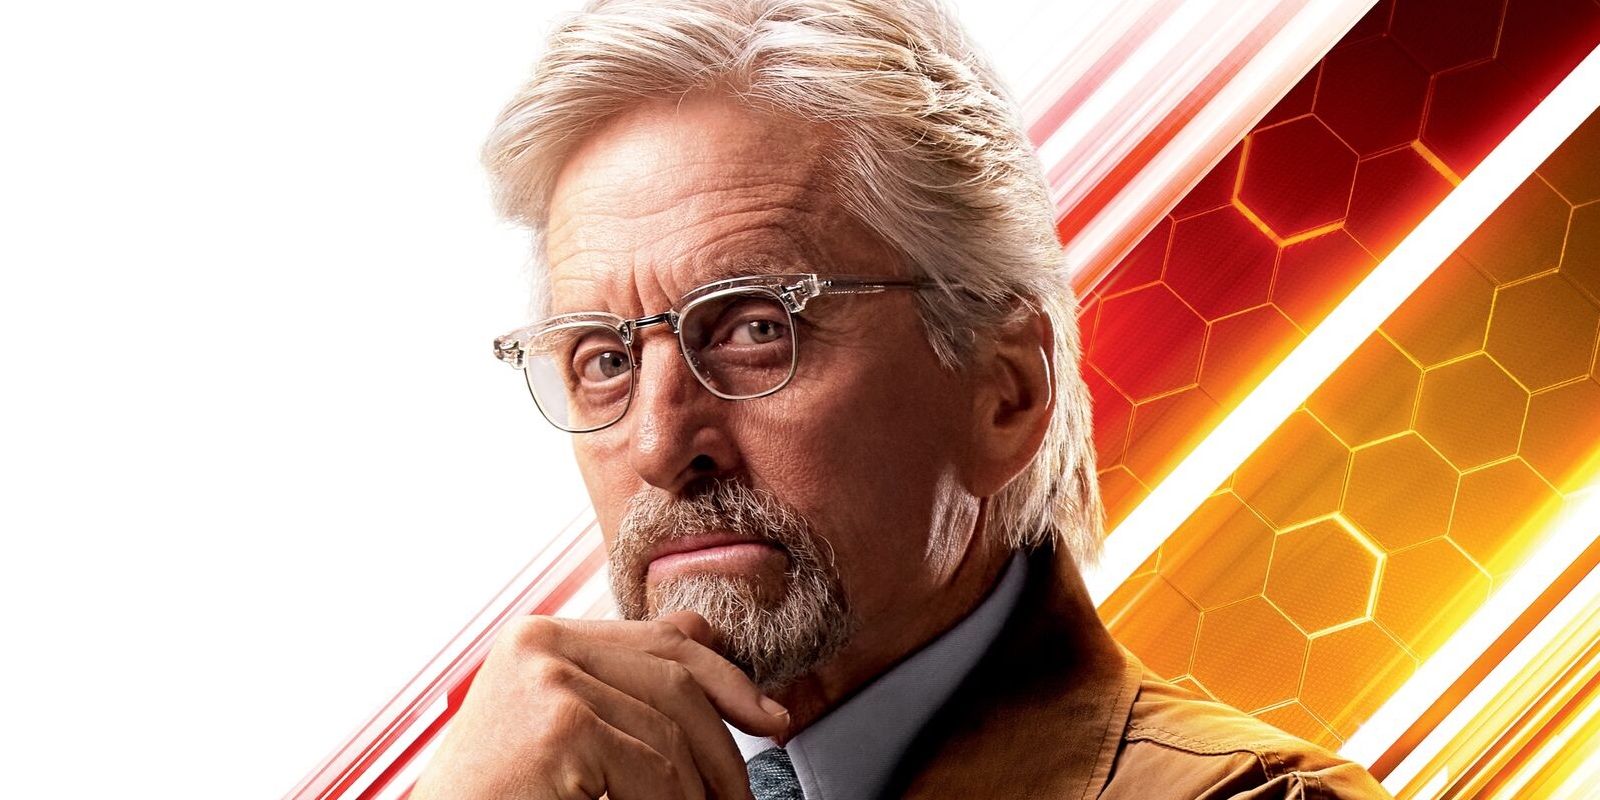 Ant-Man and the Wasp Hank Pym Michael Douglas